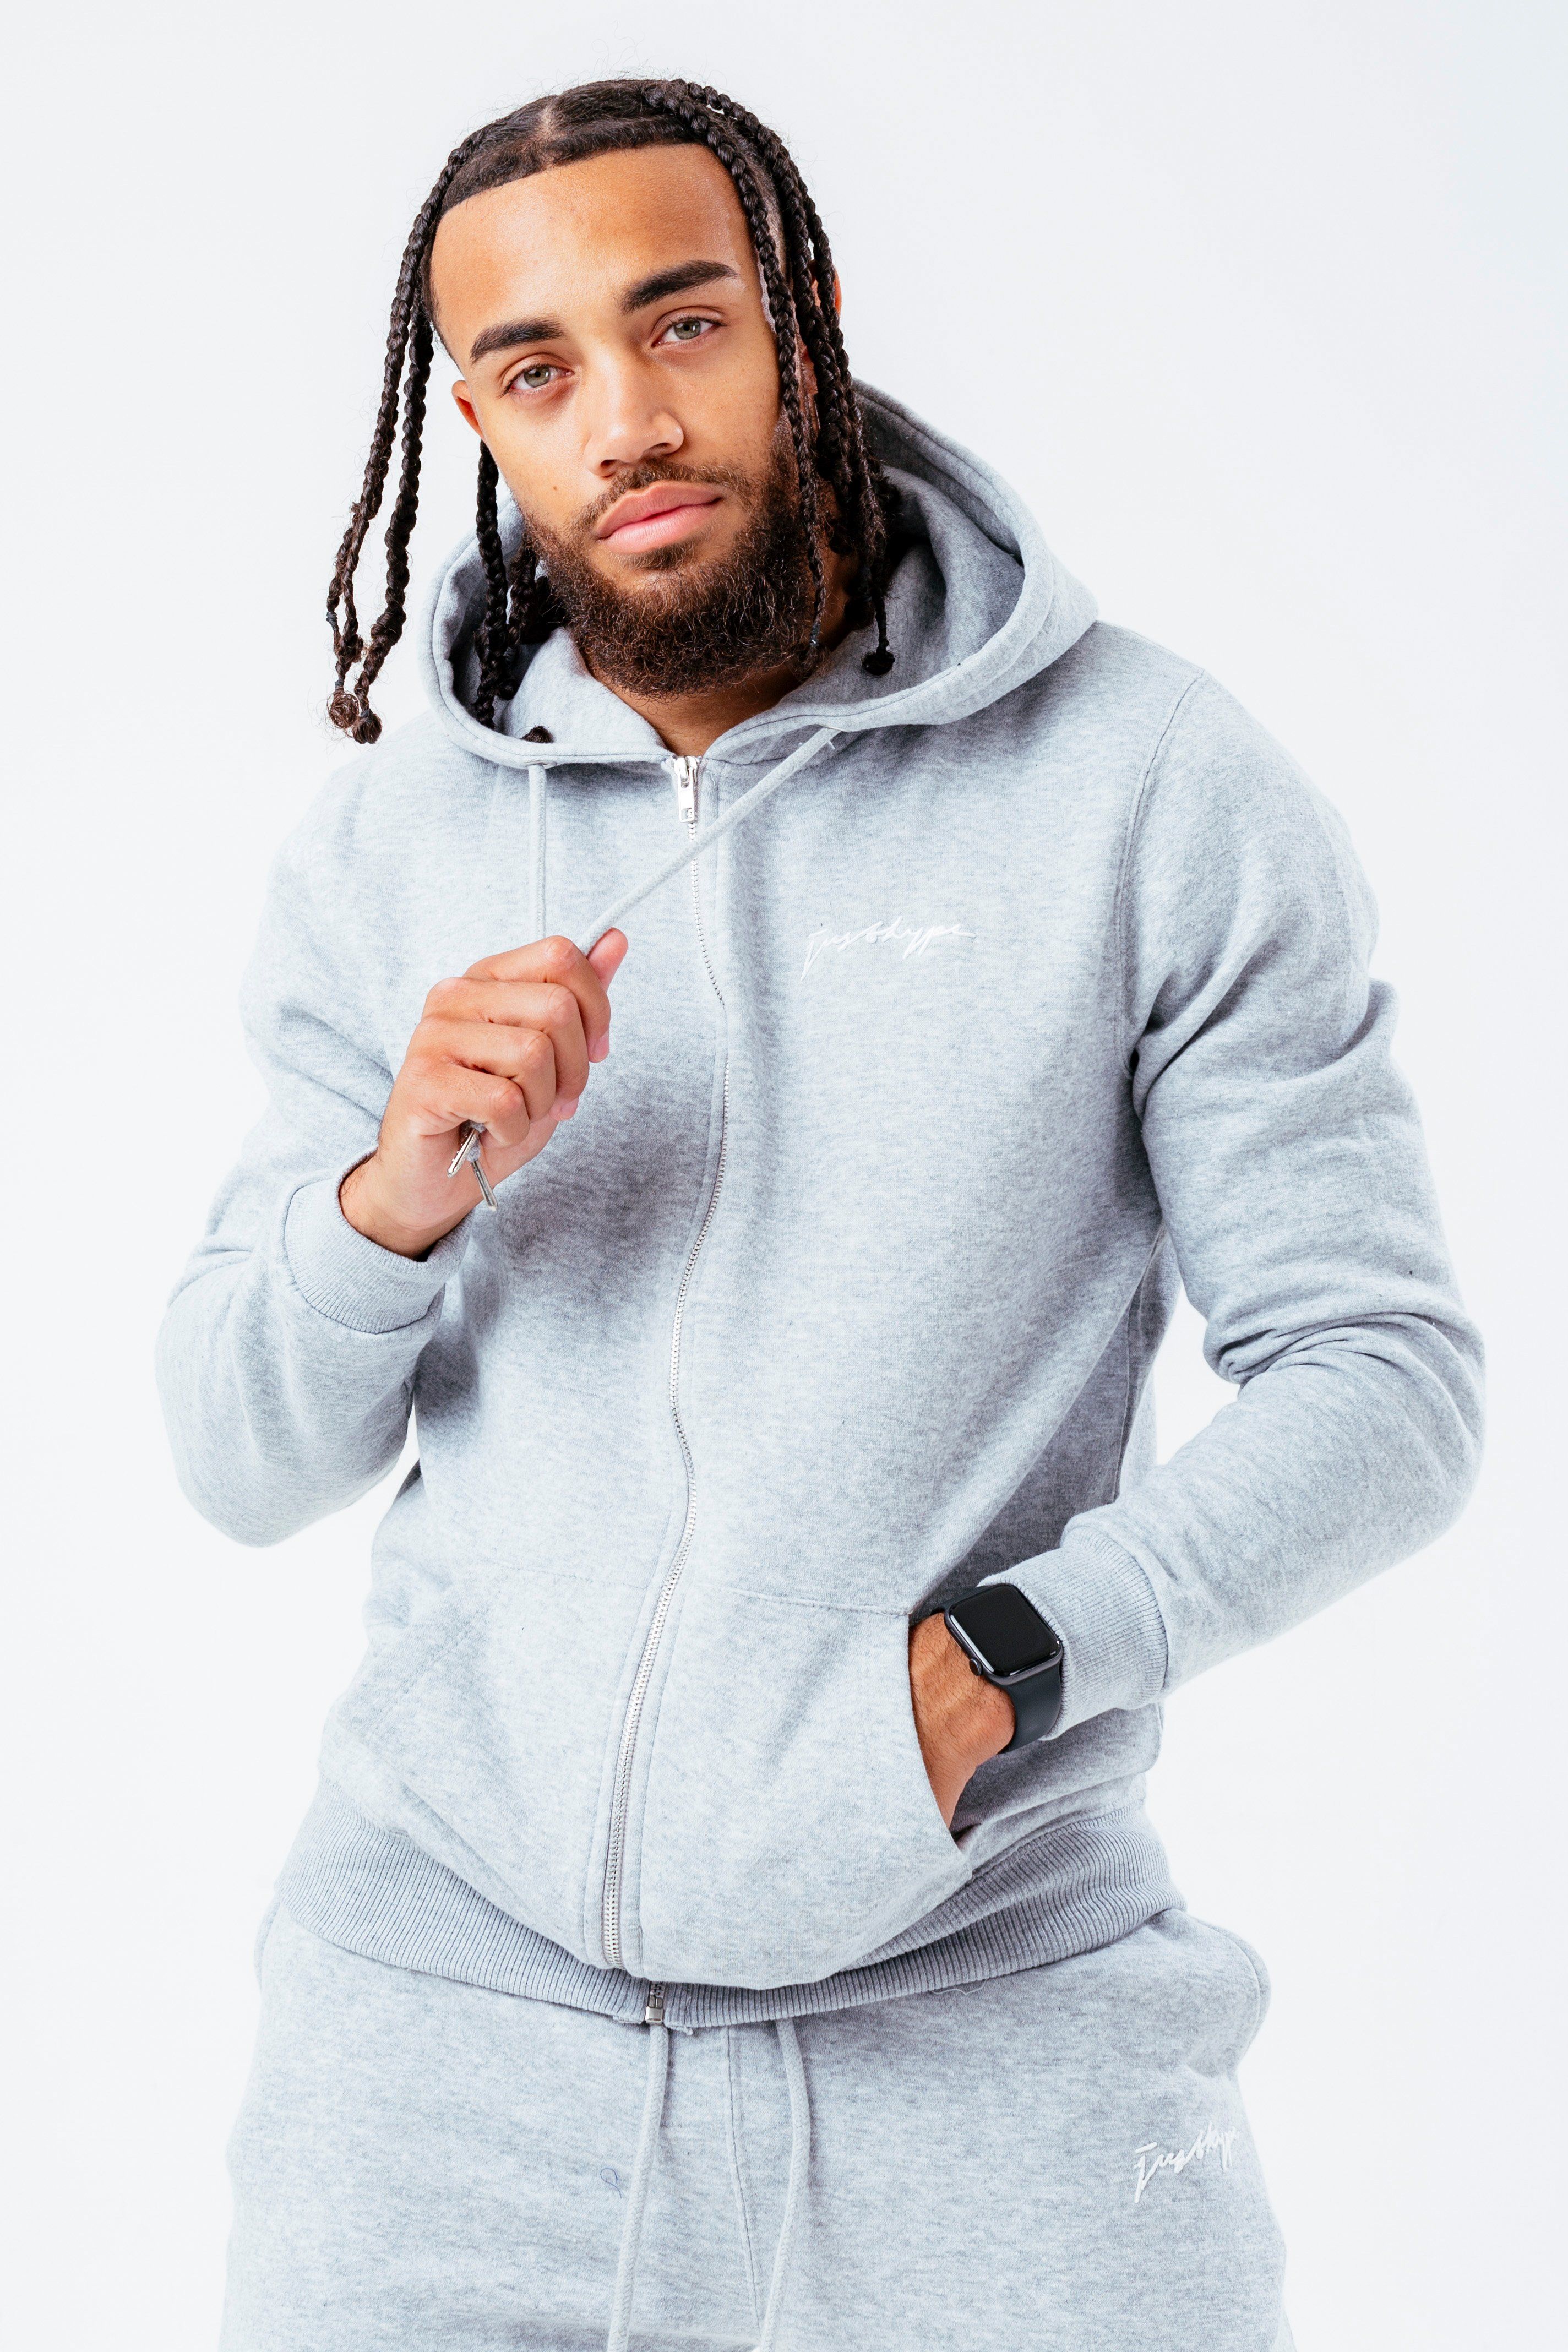 The HYPE. Men's marble tracksuit set is the new go-to everyday essential. Designed in our classic zip jacket shape, with a fixed hood and fitted hem and cuffs. Which is paired with our standard fit, ultimate comfort joggers, featuring drawstring pullers and an elasticated waistband. With a marble inspired all-over print in contrasting grey tones. Finished with the embroidered just hype signature logo on the front in a contrasting white. Machine washable.